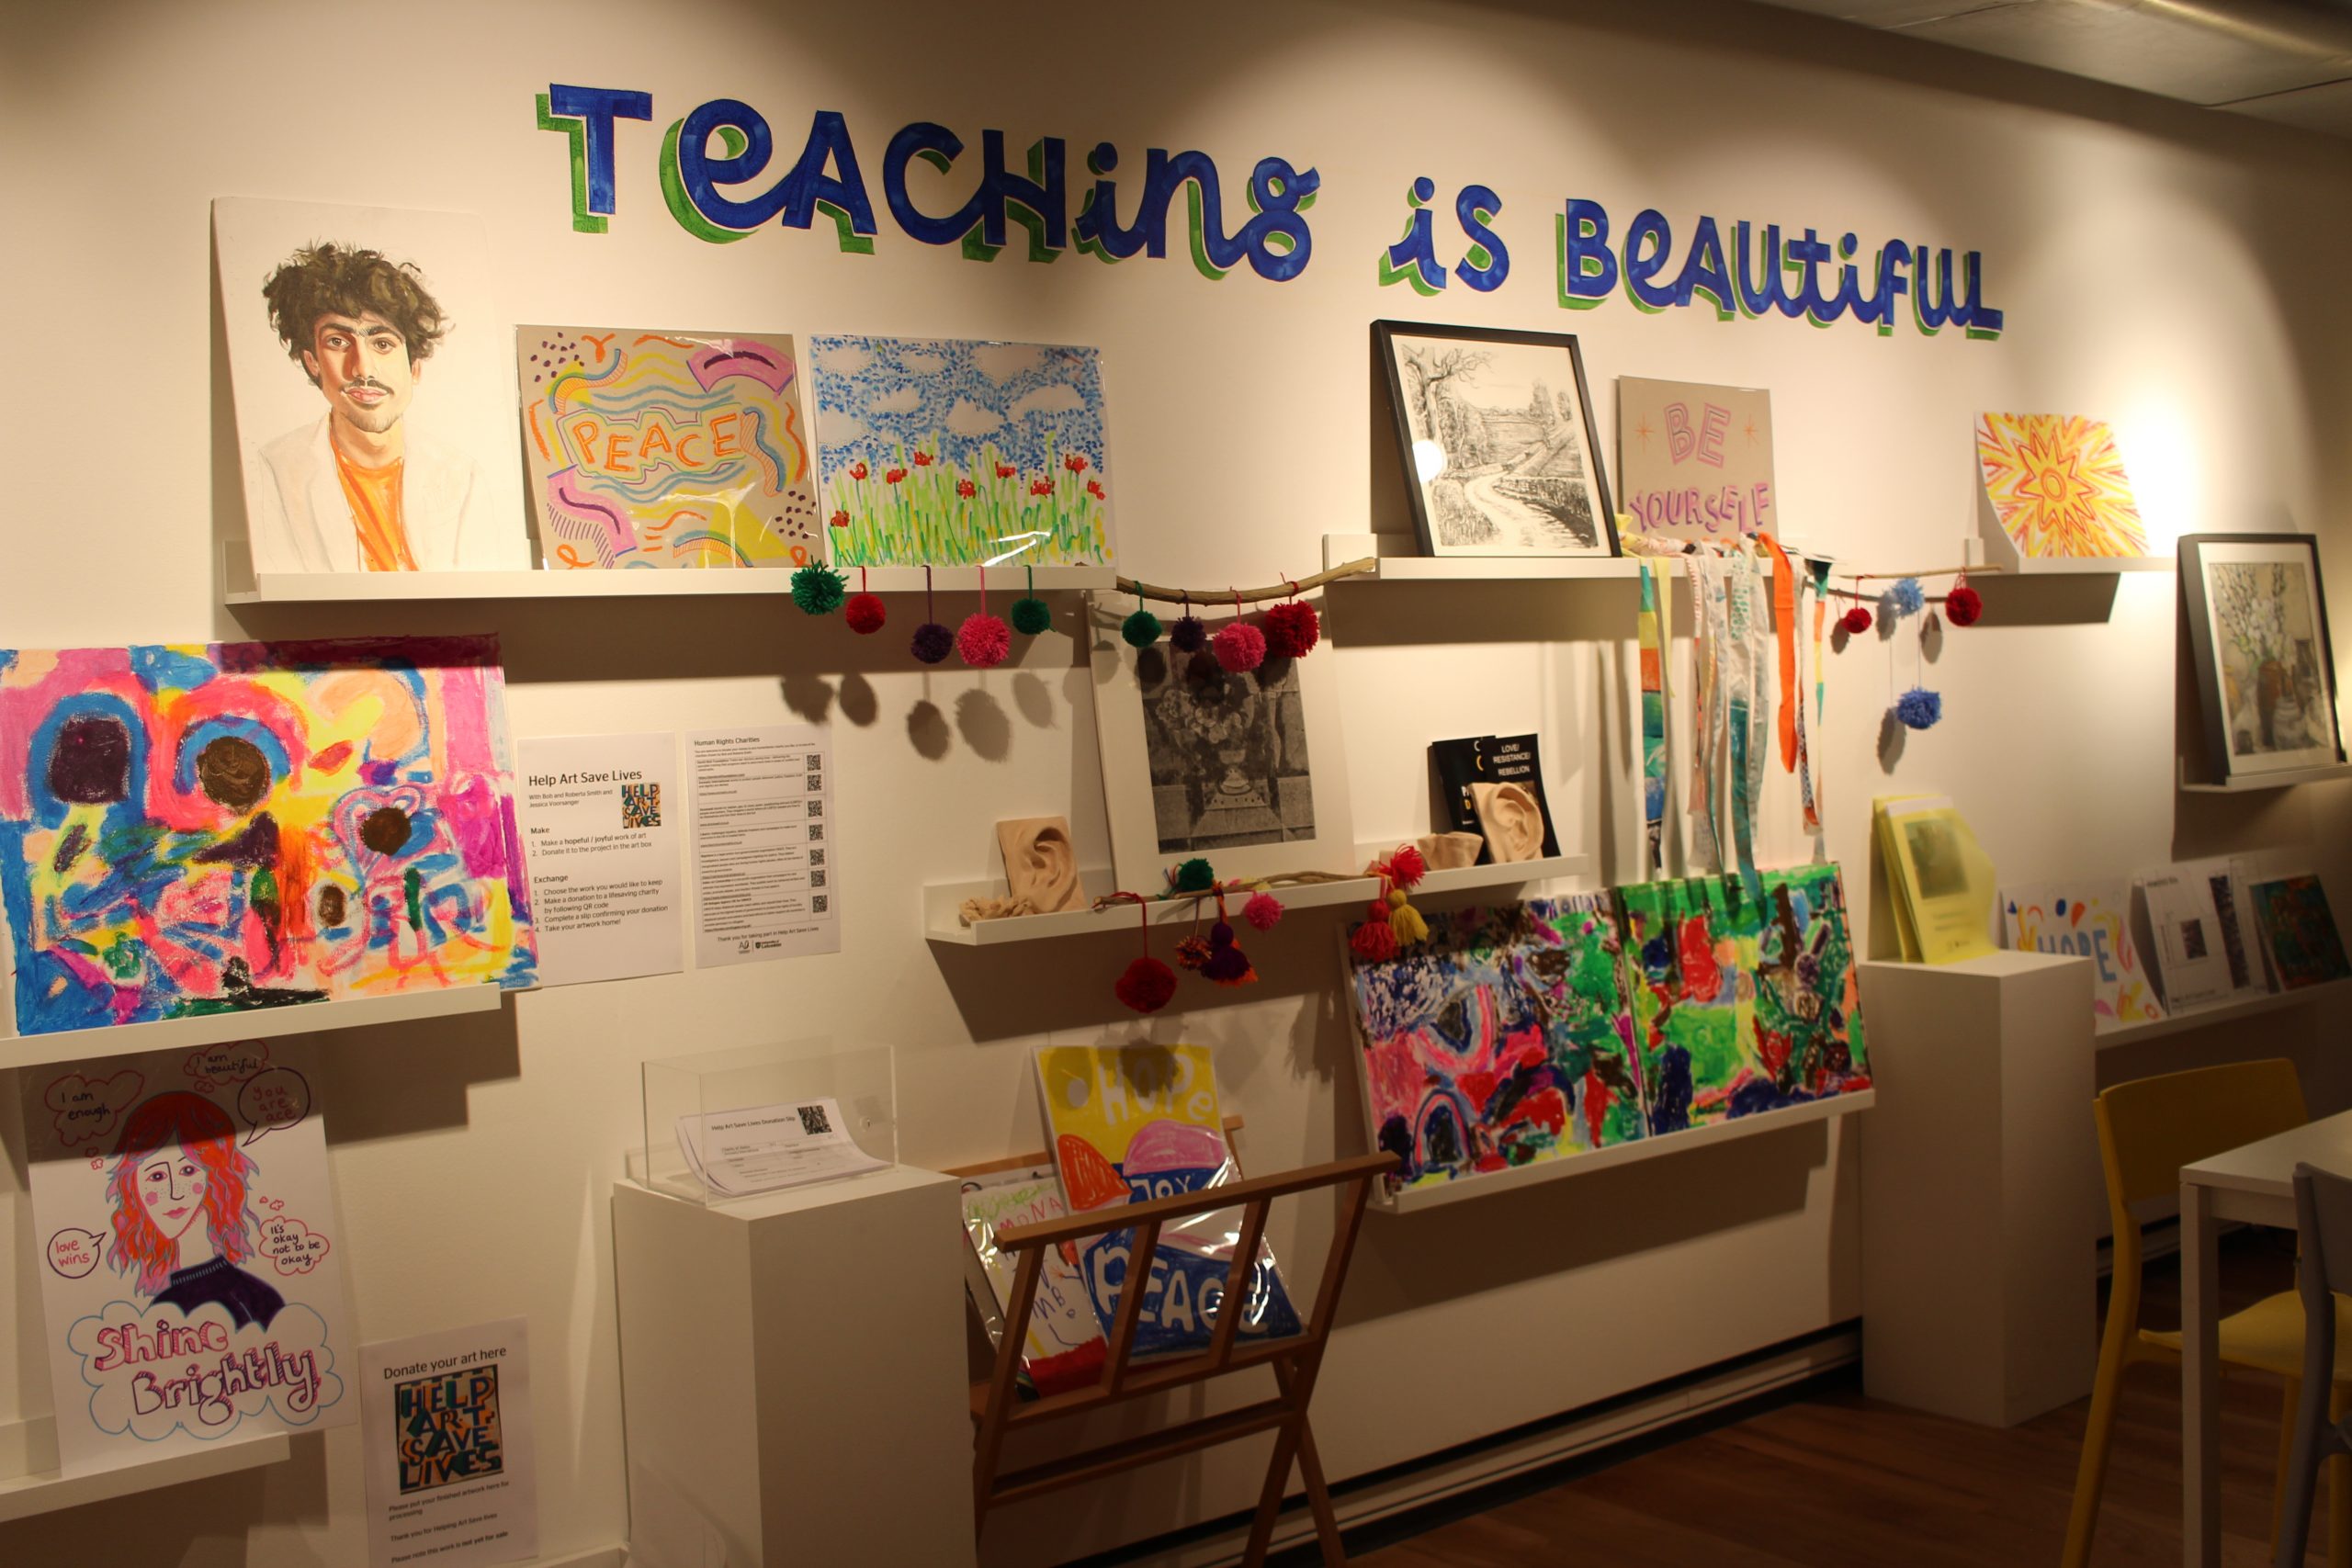 A wall full of art with teaching is beautiful painted on the wall.